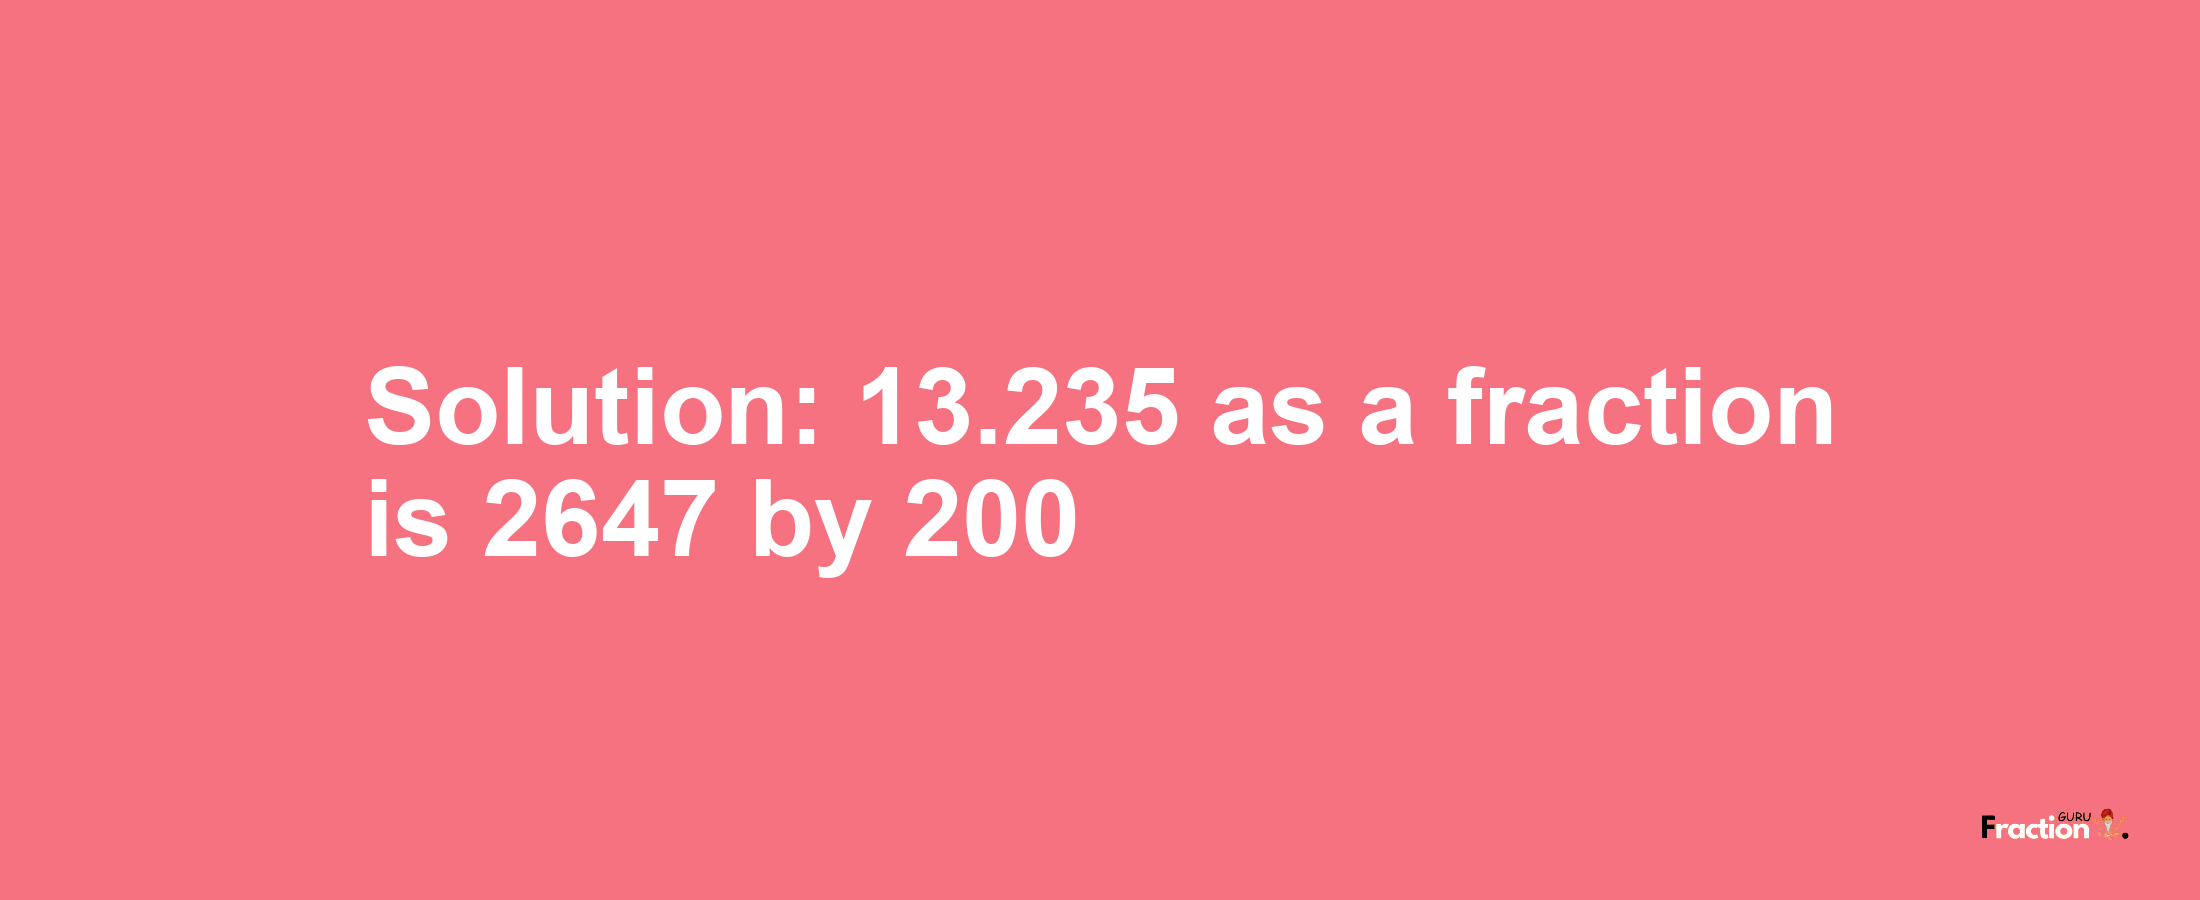 Solution:13.235 as a fraction is 2647/200